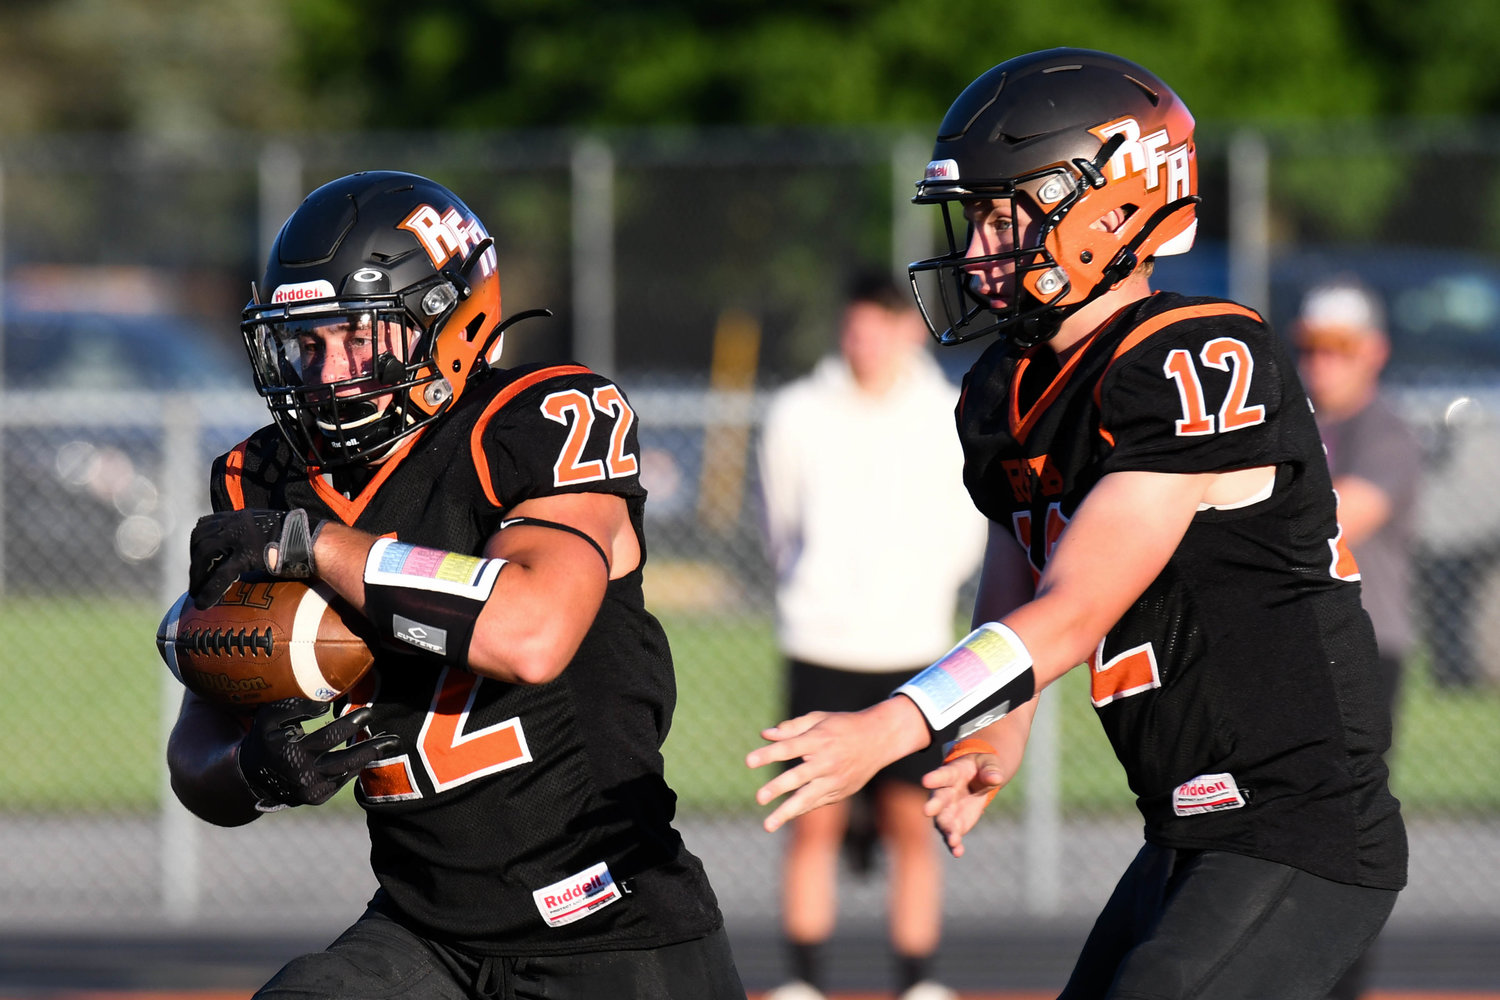 Rome Free Academy running back Salvatore Martelli takes a handoff from quarterback Evan Carlson-Stephenson during Friday's season-opening 52-26 loss to New Hartford at RFA Stadium. Martelli had 77 total yards of offense. Carlson-Stephenson was 20-for-34 passing for 219 yards and three scores.